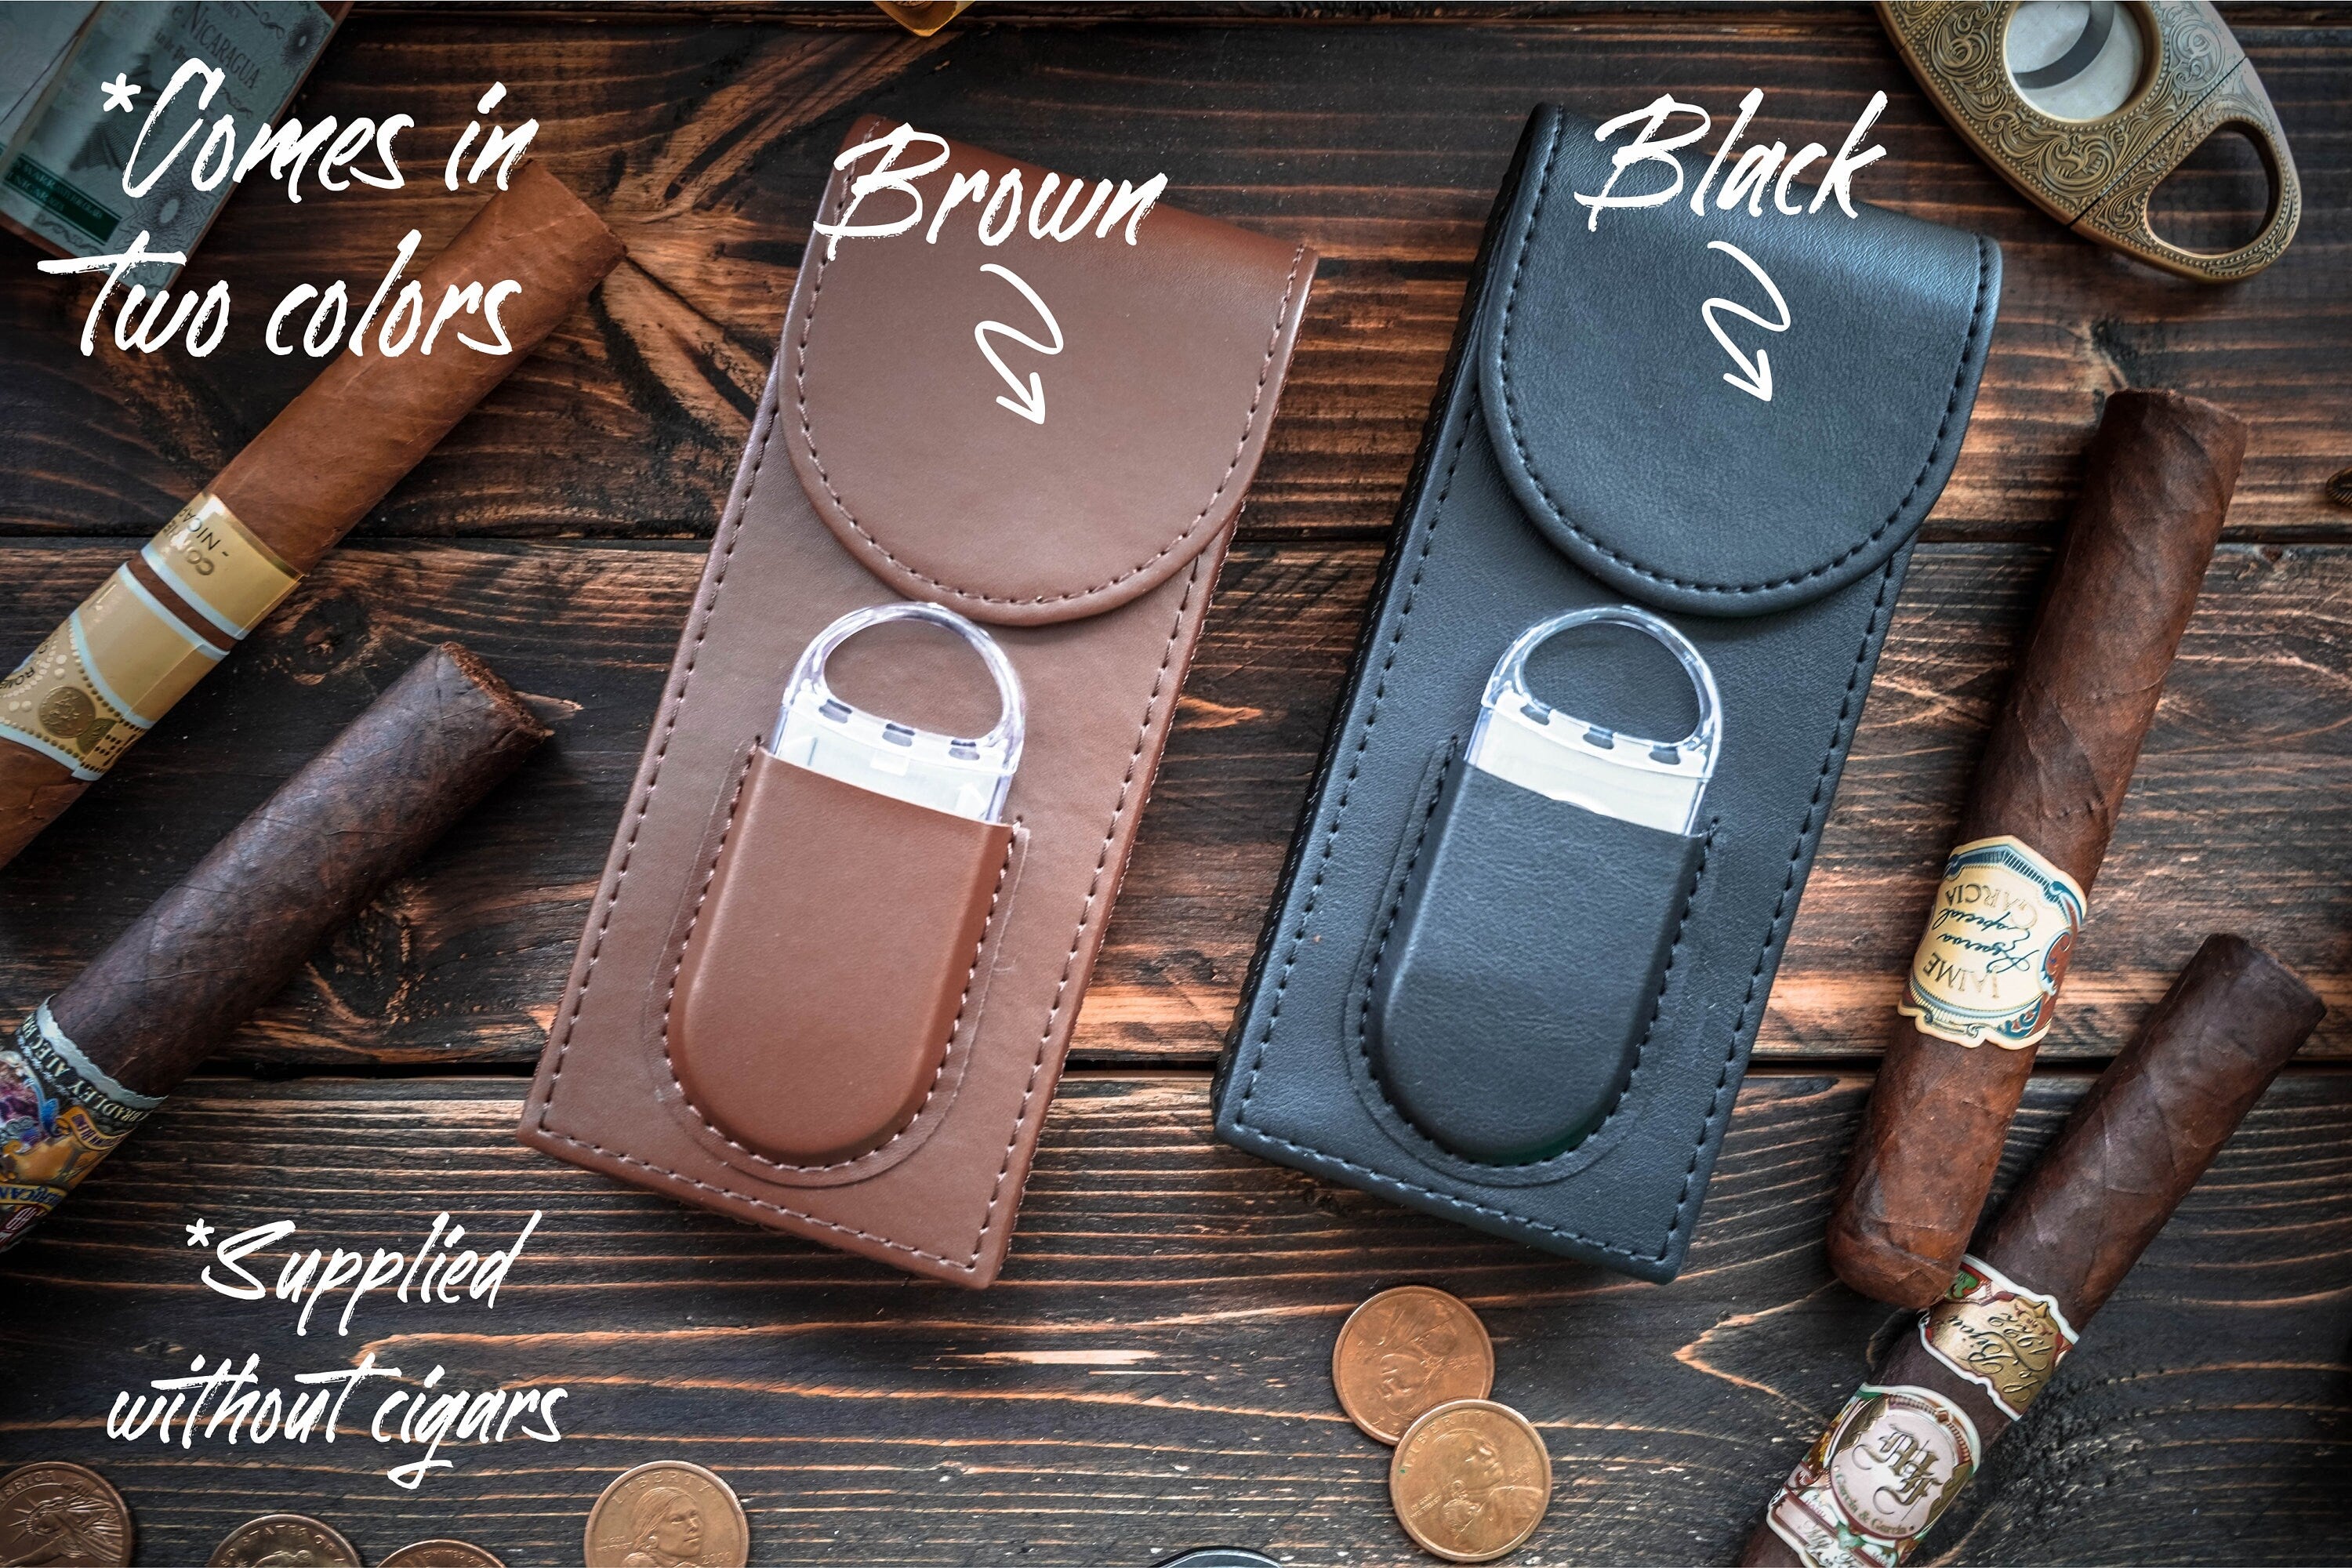 Buy Leather Cigar Travel Case for 2 cigars